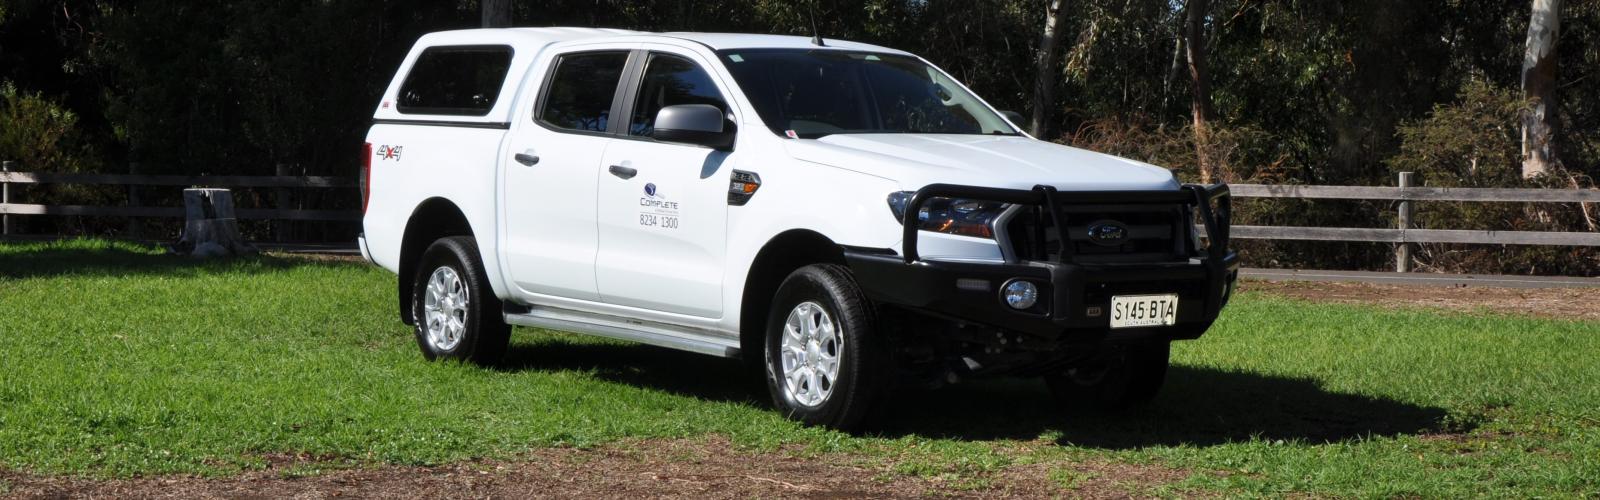 4WD Ford Ranger Dual Cab Canopy 4WD Hire2